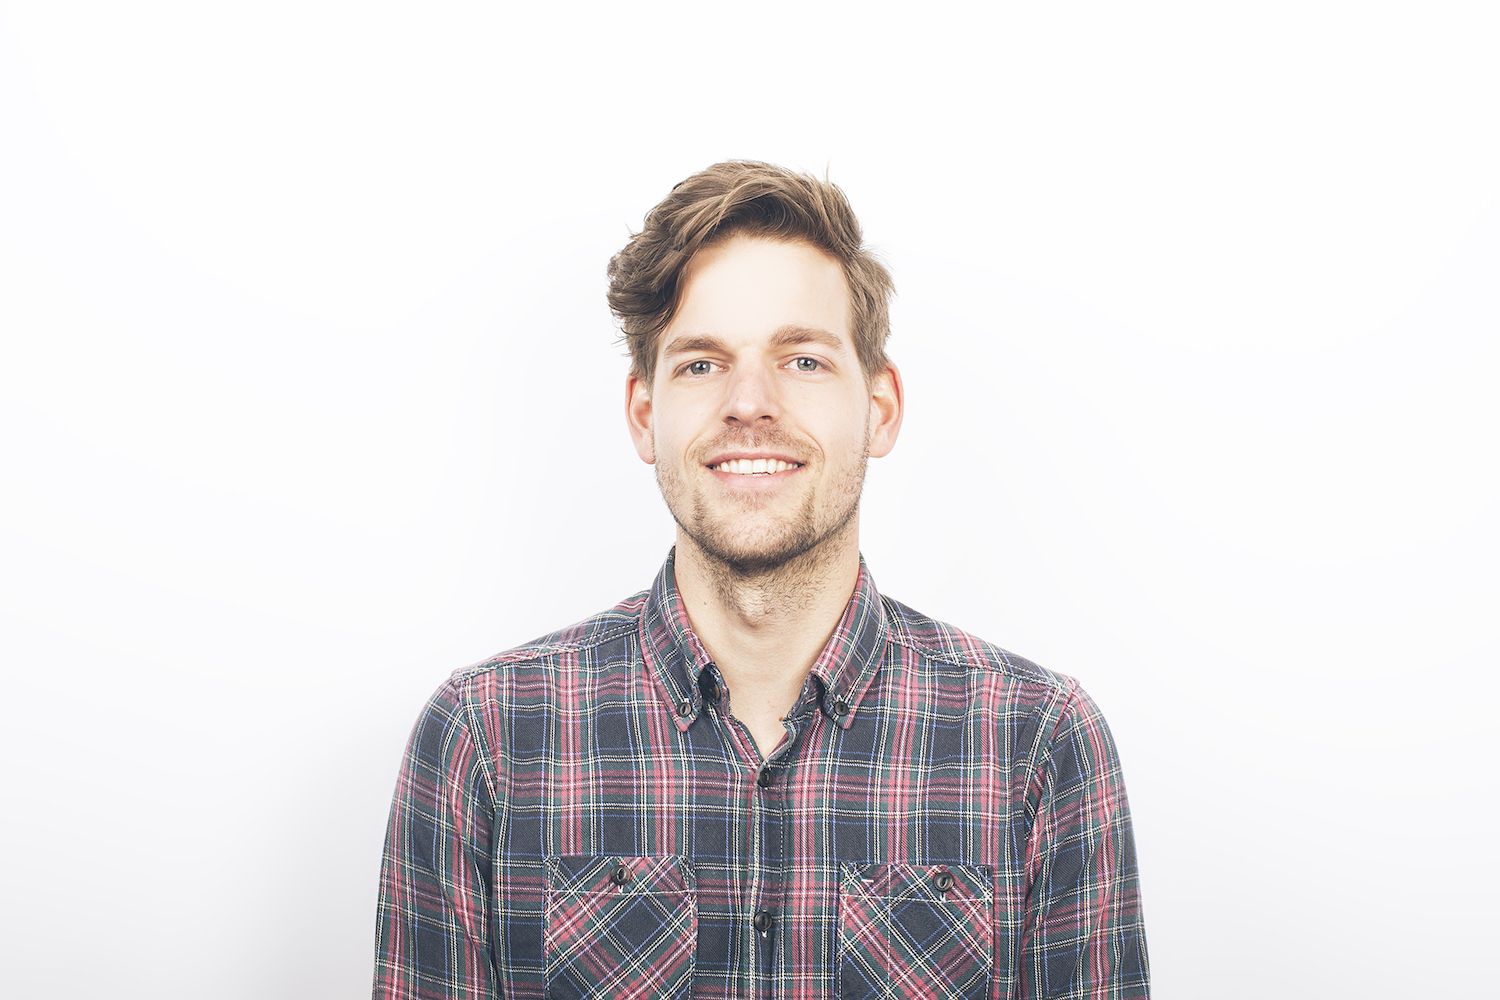 Profile picture of Thomas Schrijer - Design director at WeTransfer